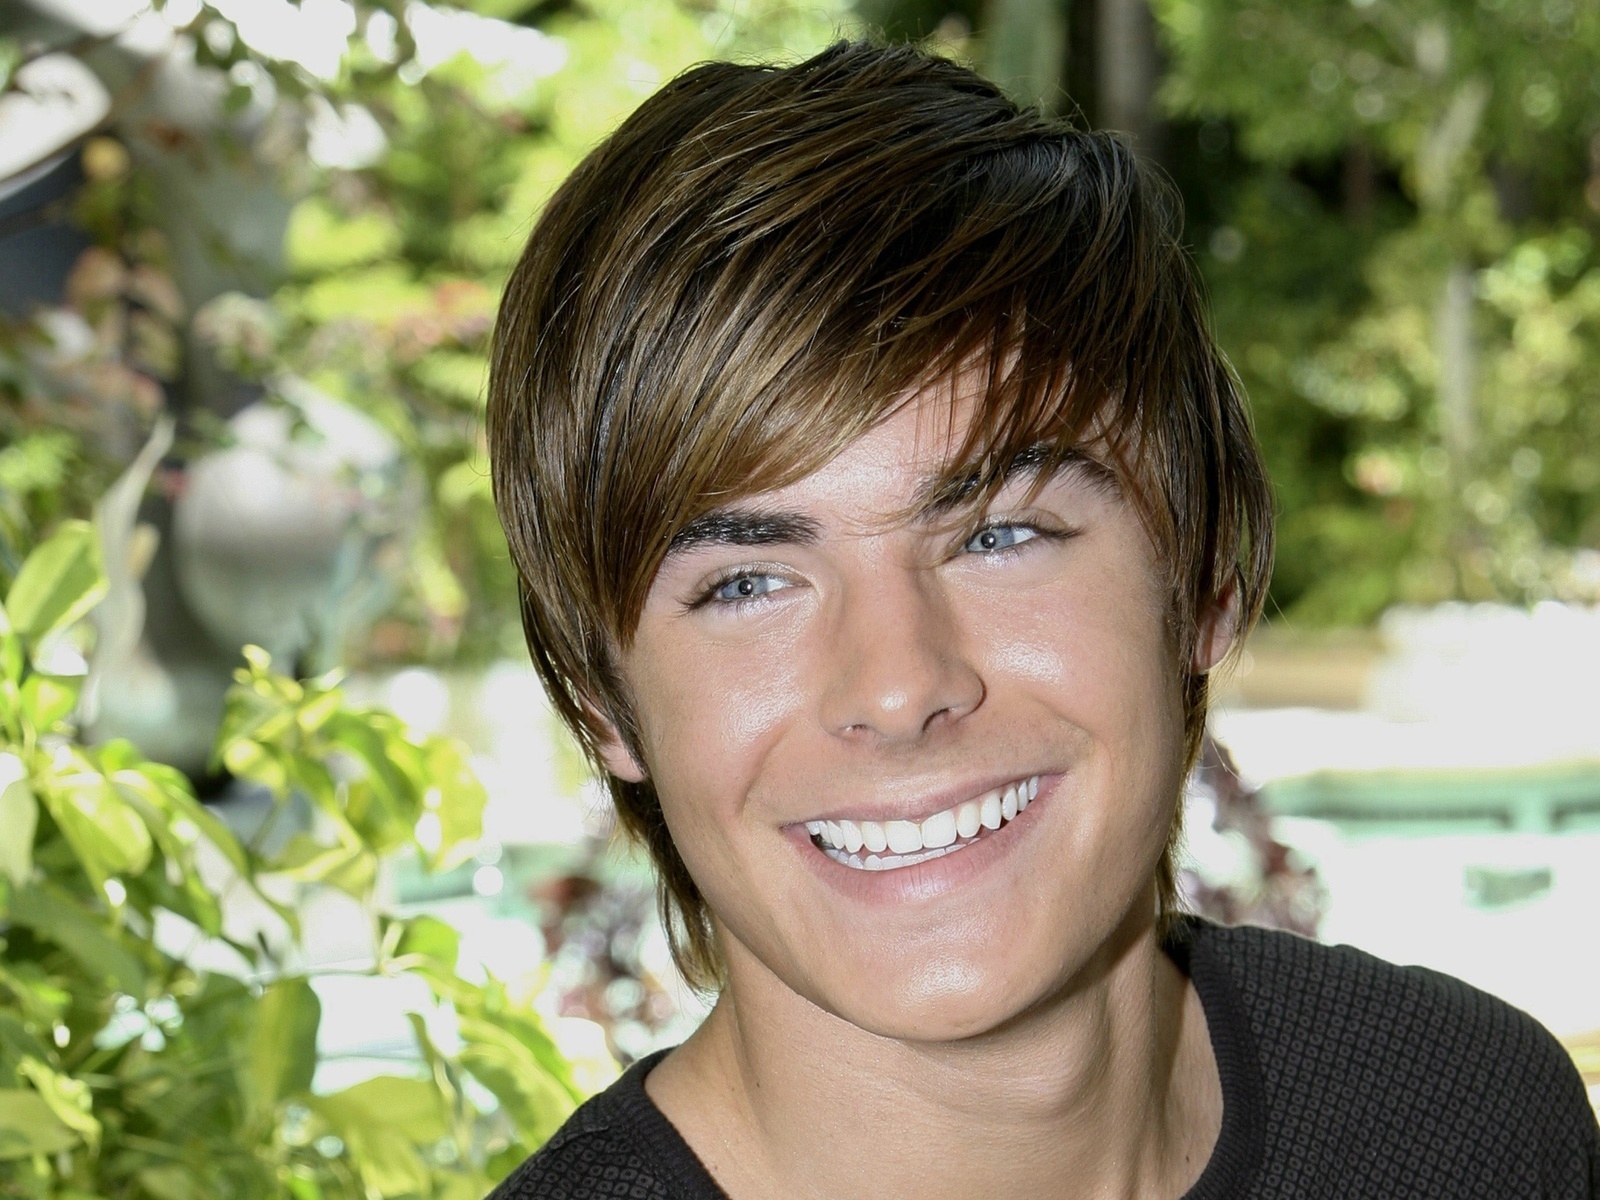 Zac Efron Smile for 1600 x 1200 resolution